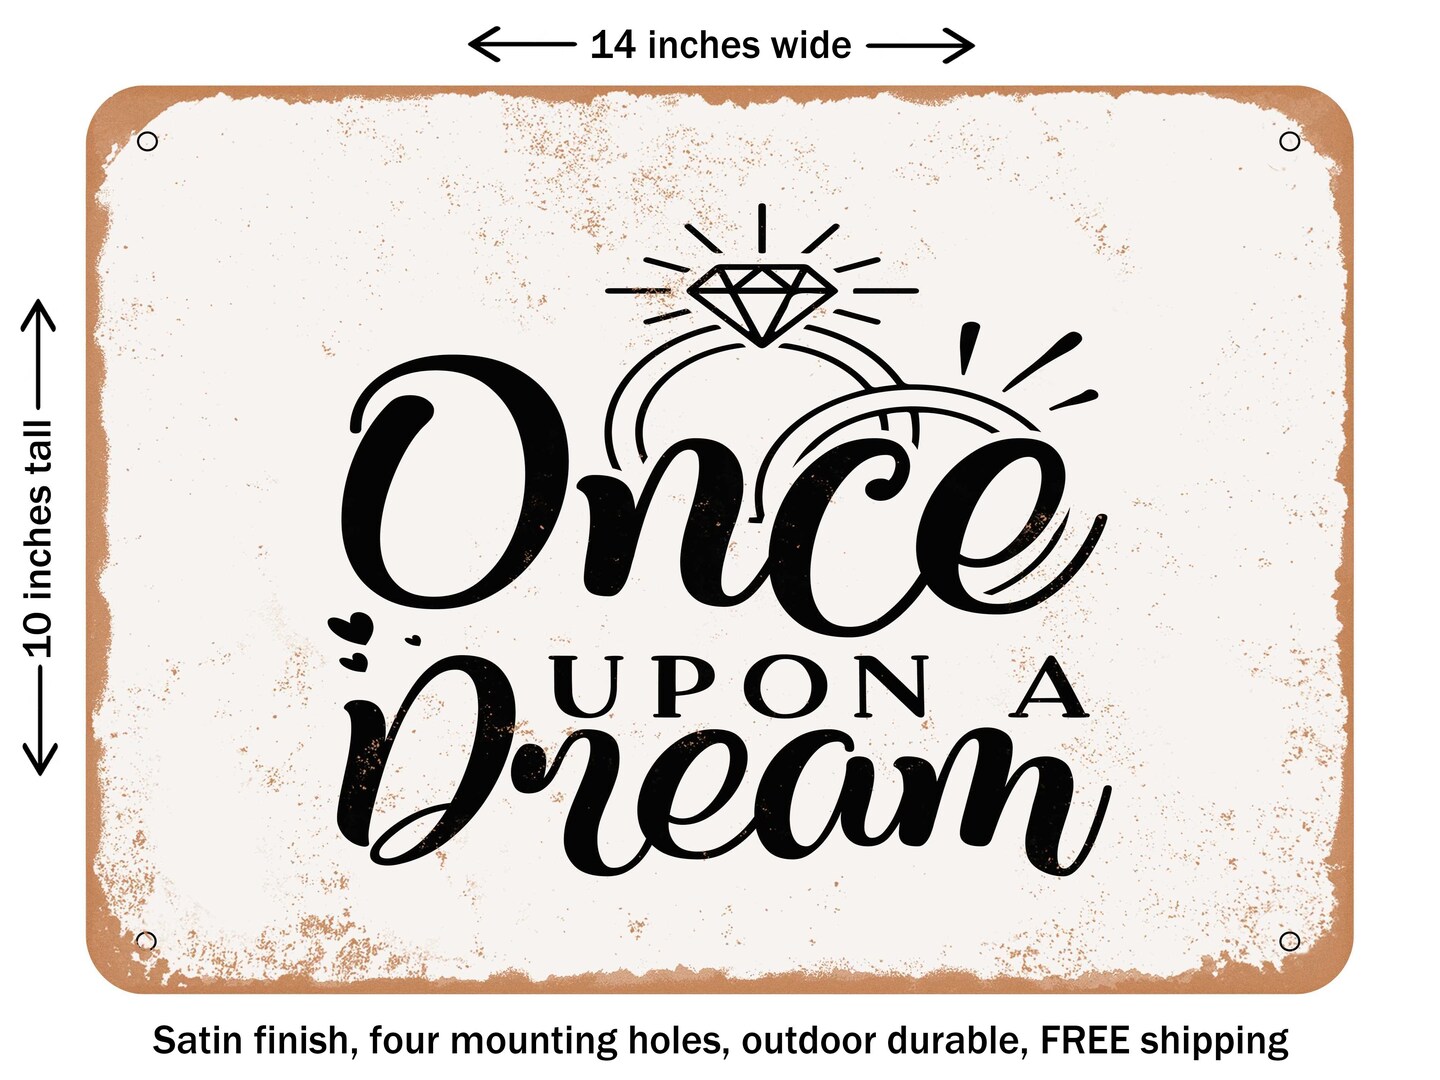 DECORATIVE METAL SIGN - Once Upon a Dream - Vintage Rusty Look